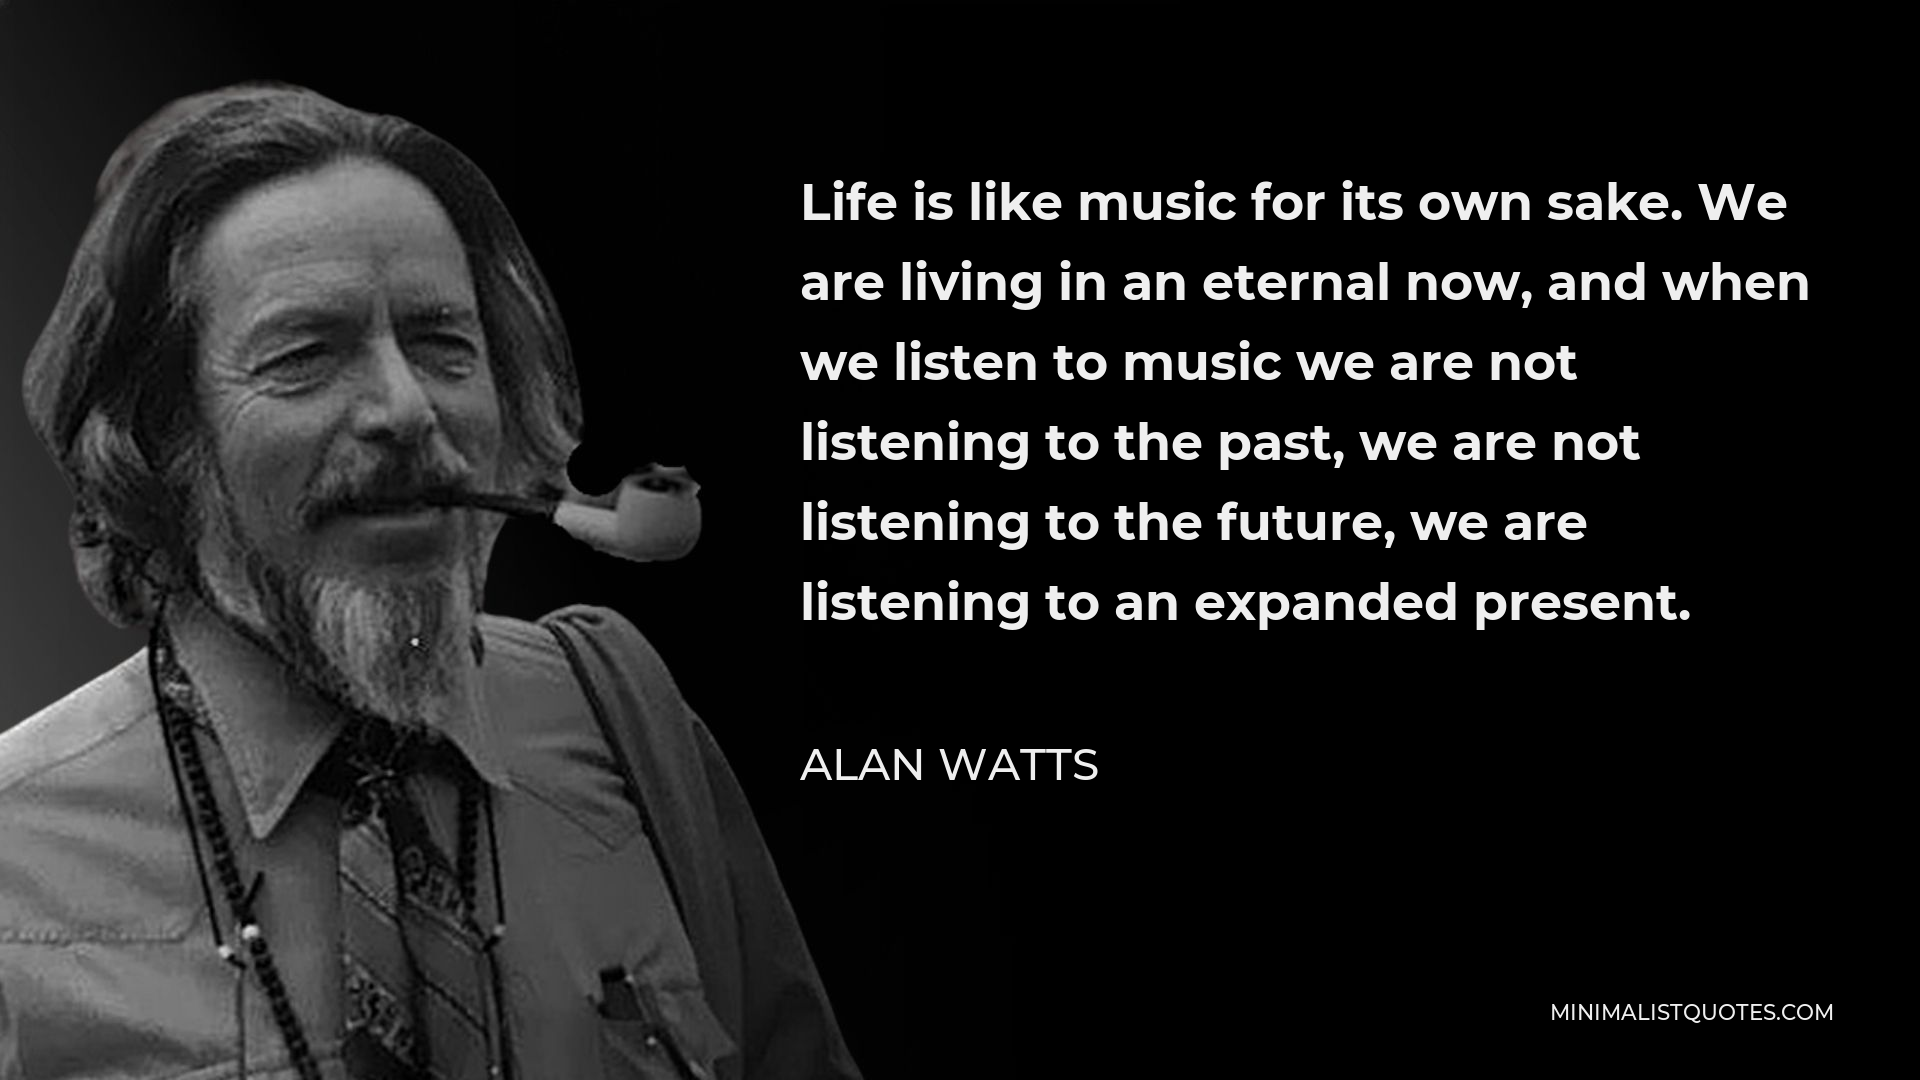 Alan Watts Quote - Life is like music for its own sake. We are living in an eternal now, and when we listen to music we are not listening to the past, we are not listening to the future, we are listening to an expanded present.